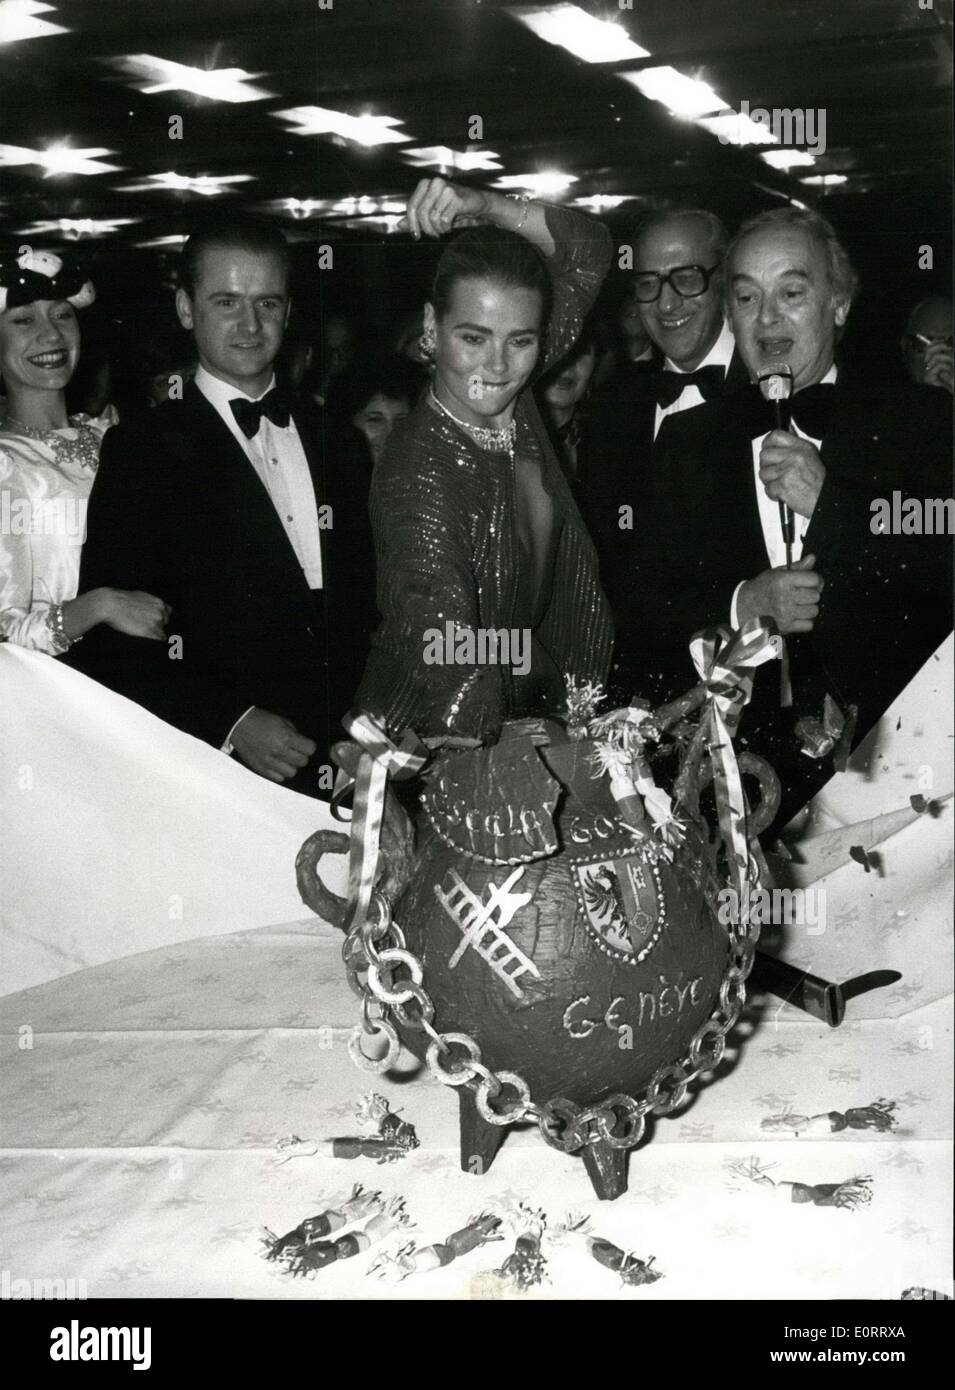 May 08, 1960 - Margeaux Hemingway guest of honor at Geneva's Celebration of resistance: Model and actress Margeaux Hemingway, niece of late American Writer Ernest Hemingway, has been guest of honor in Geneva at this year's traditional celebration of the ''Escalade'', the resistance of the city's people against a Savoy attack in the Middle Ages. Here Margeaux 'smashs'' the legendary ''Marmite' Stock Photo